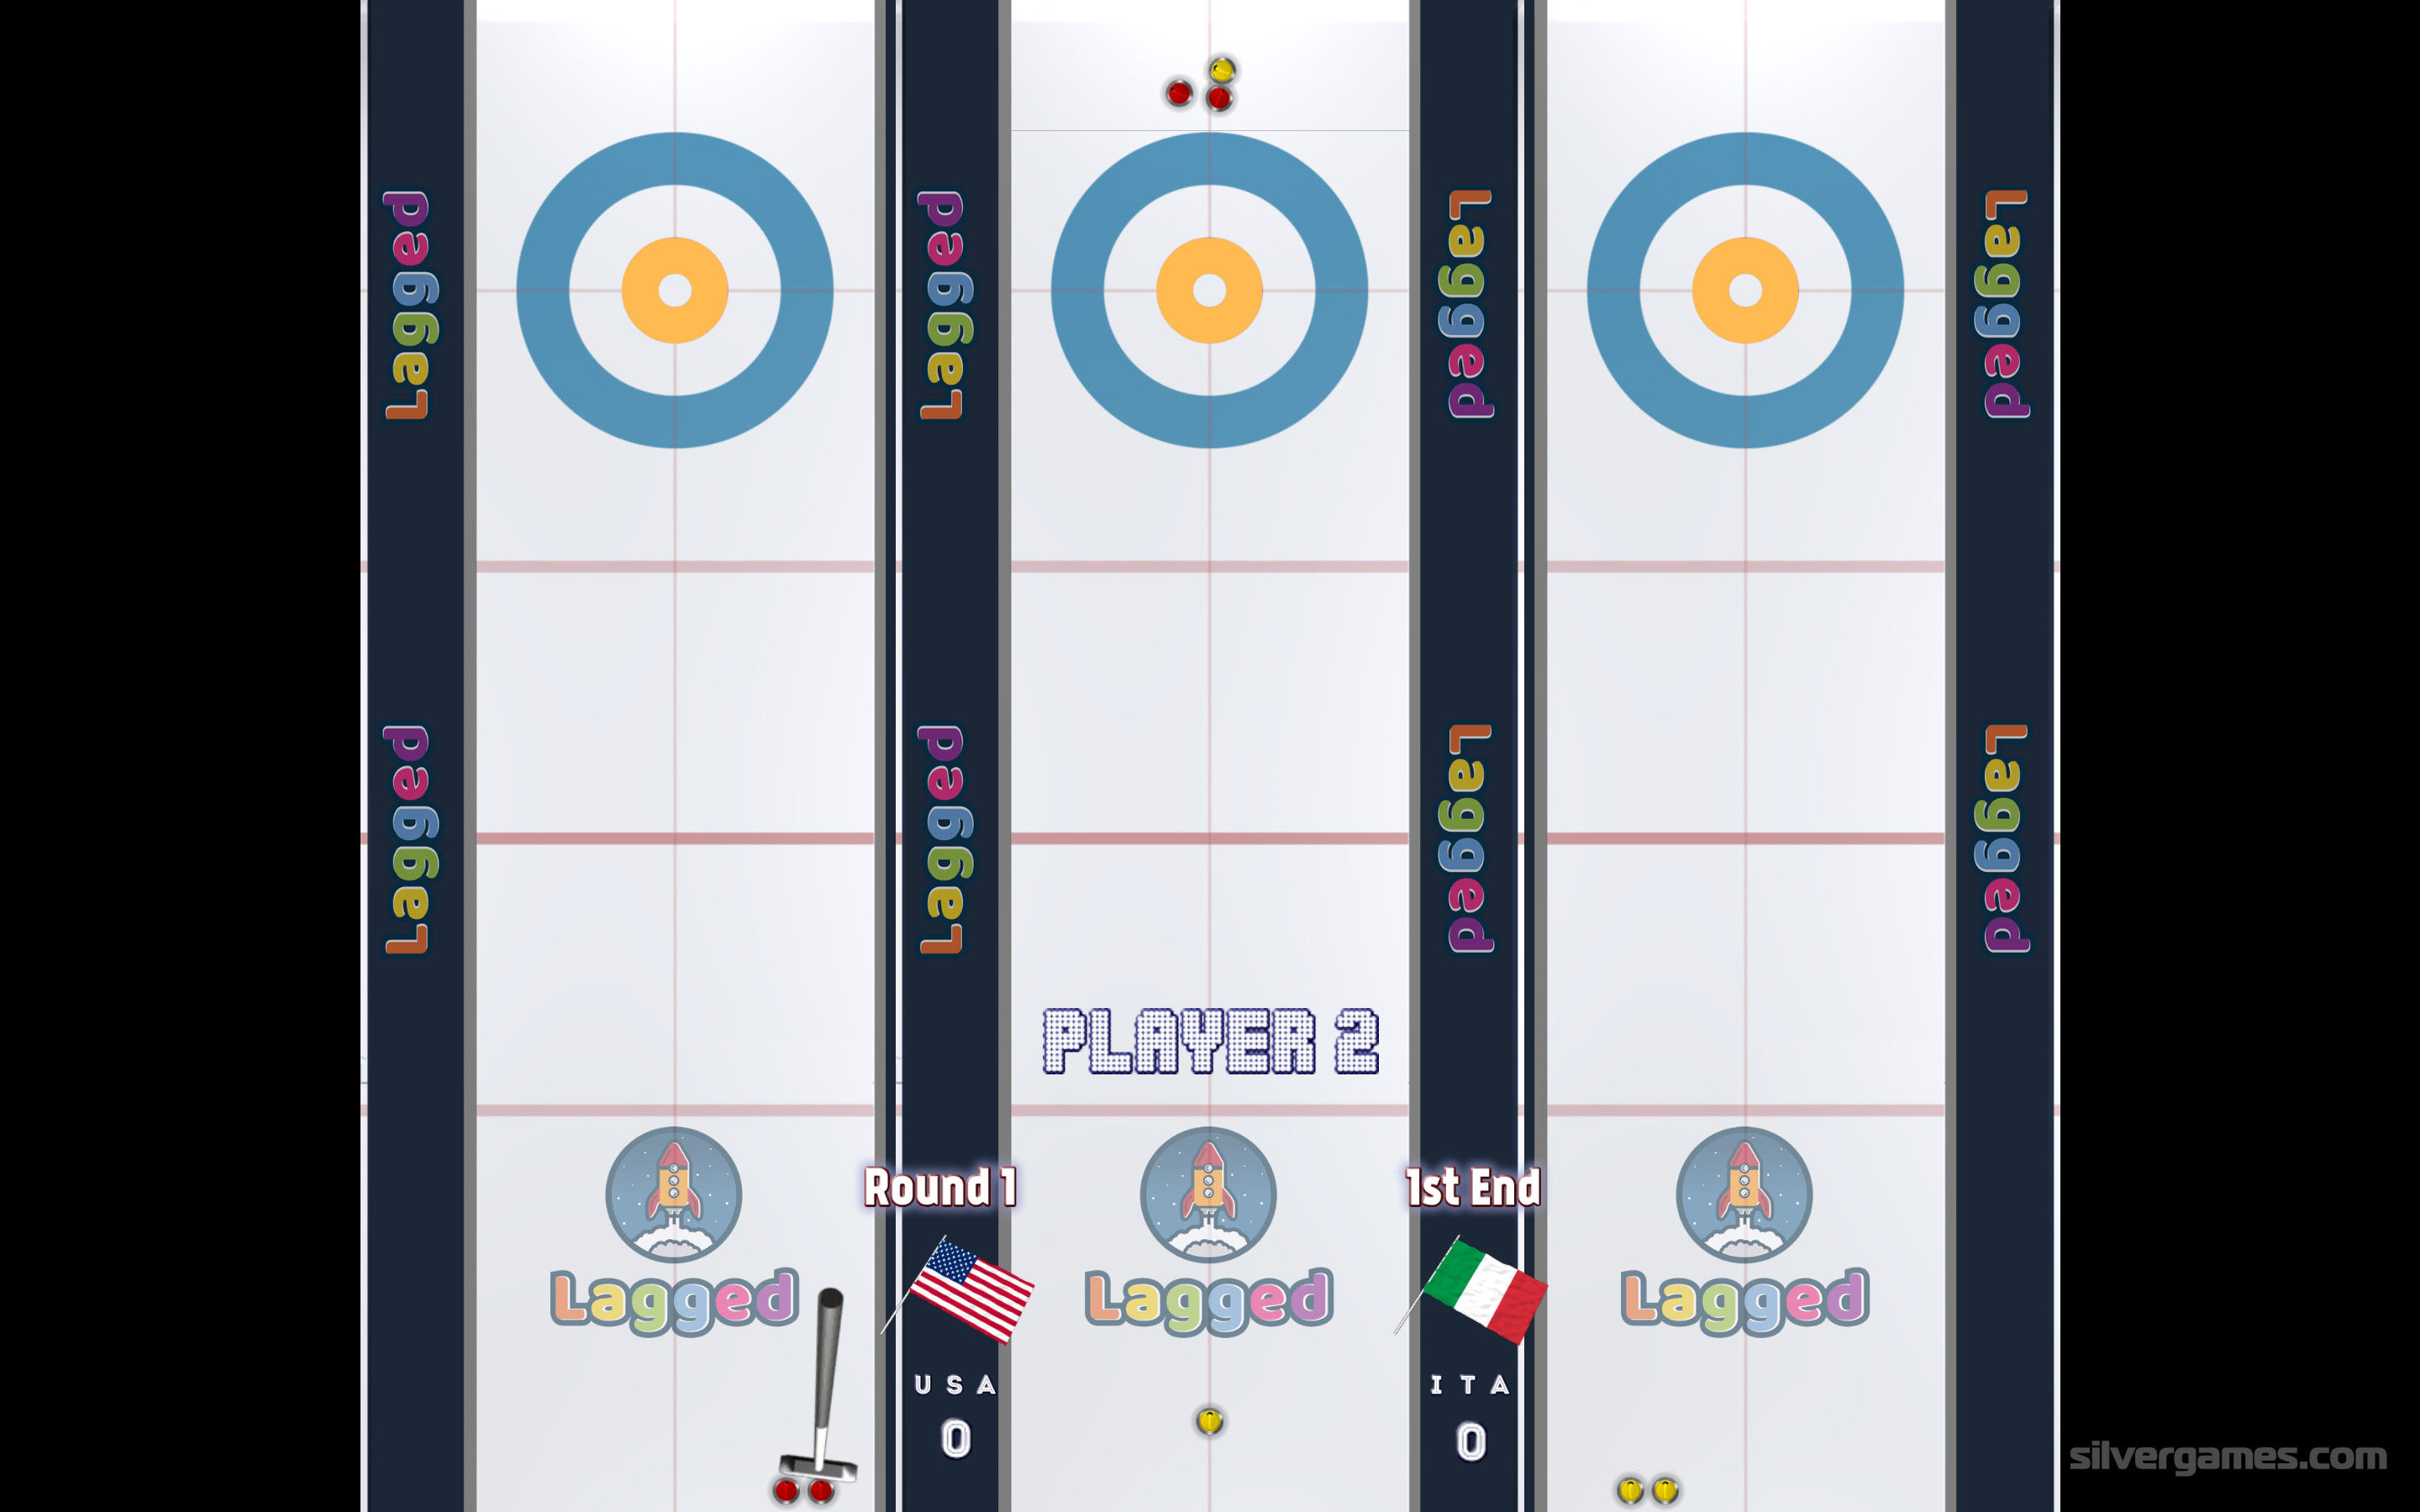 curling browser game